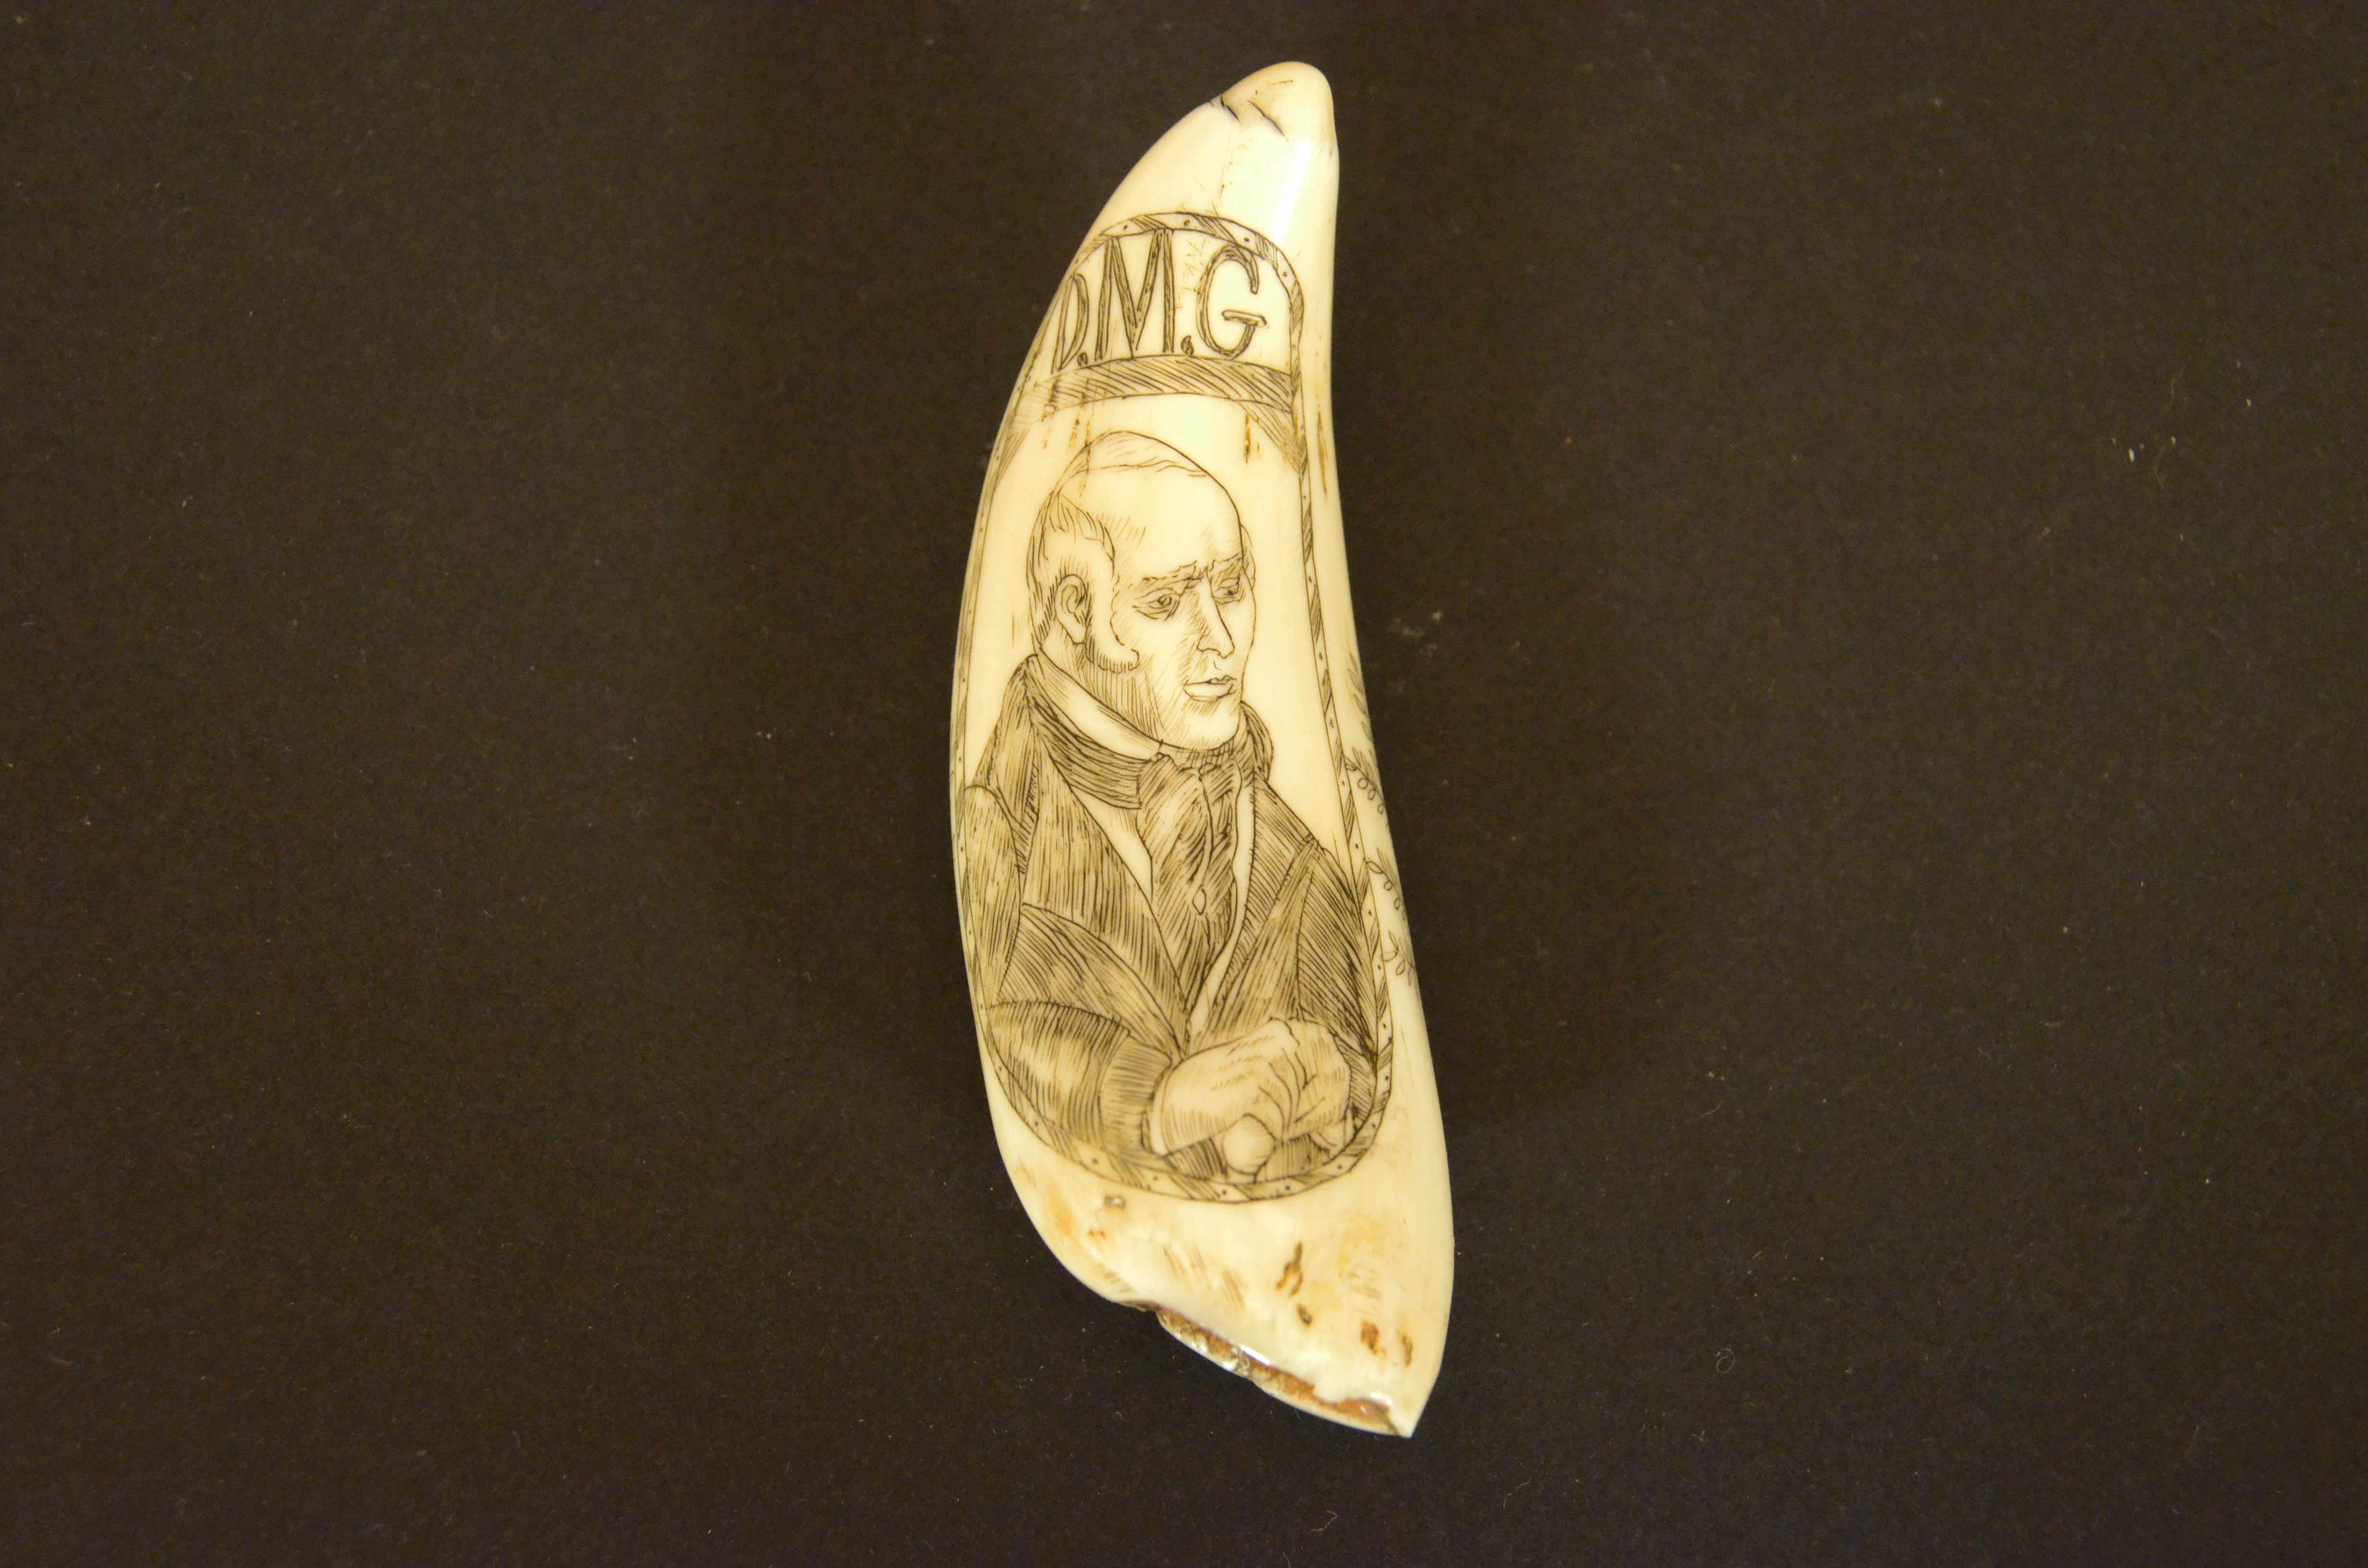 Scrimshaw of an engraved whale's tooth, depicting on one side, truncated pyramid cippus culminating with a half sphere and surmounted at the top by a six-pointed star, symbolism traceable to Freemasonry, and at the bottom the date 1820 and above the